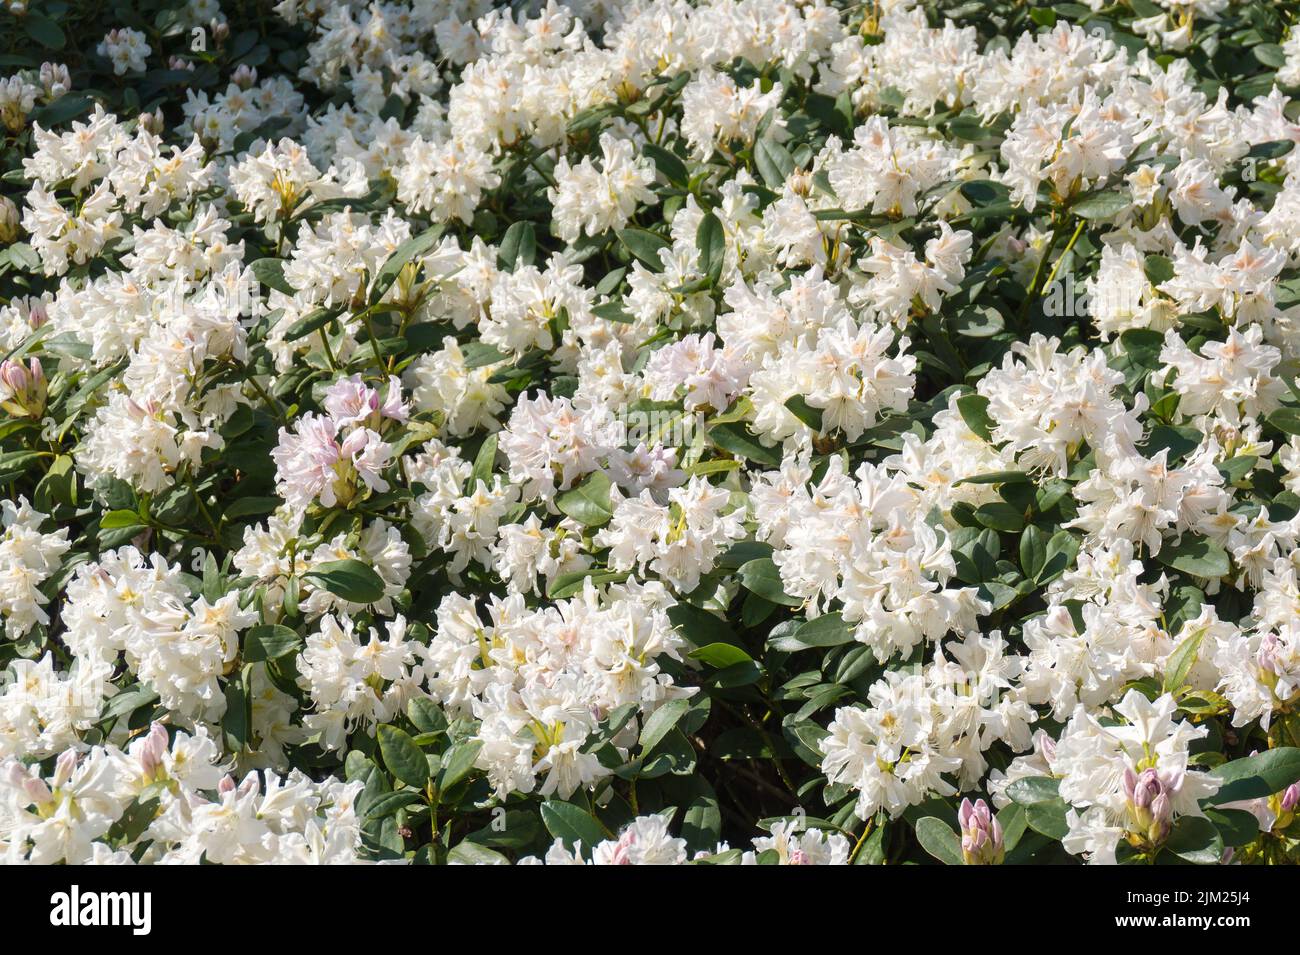 Rhododendron flower White Cunningham big beautiful blooming bush, floral background Stock Photo